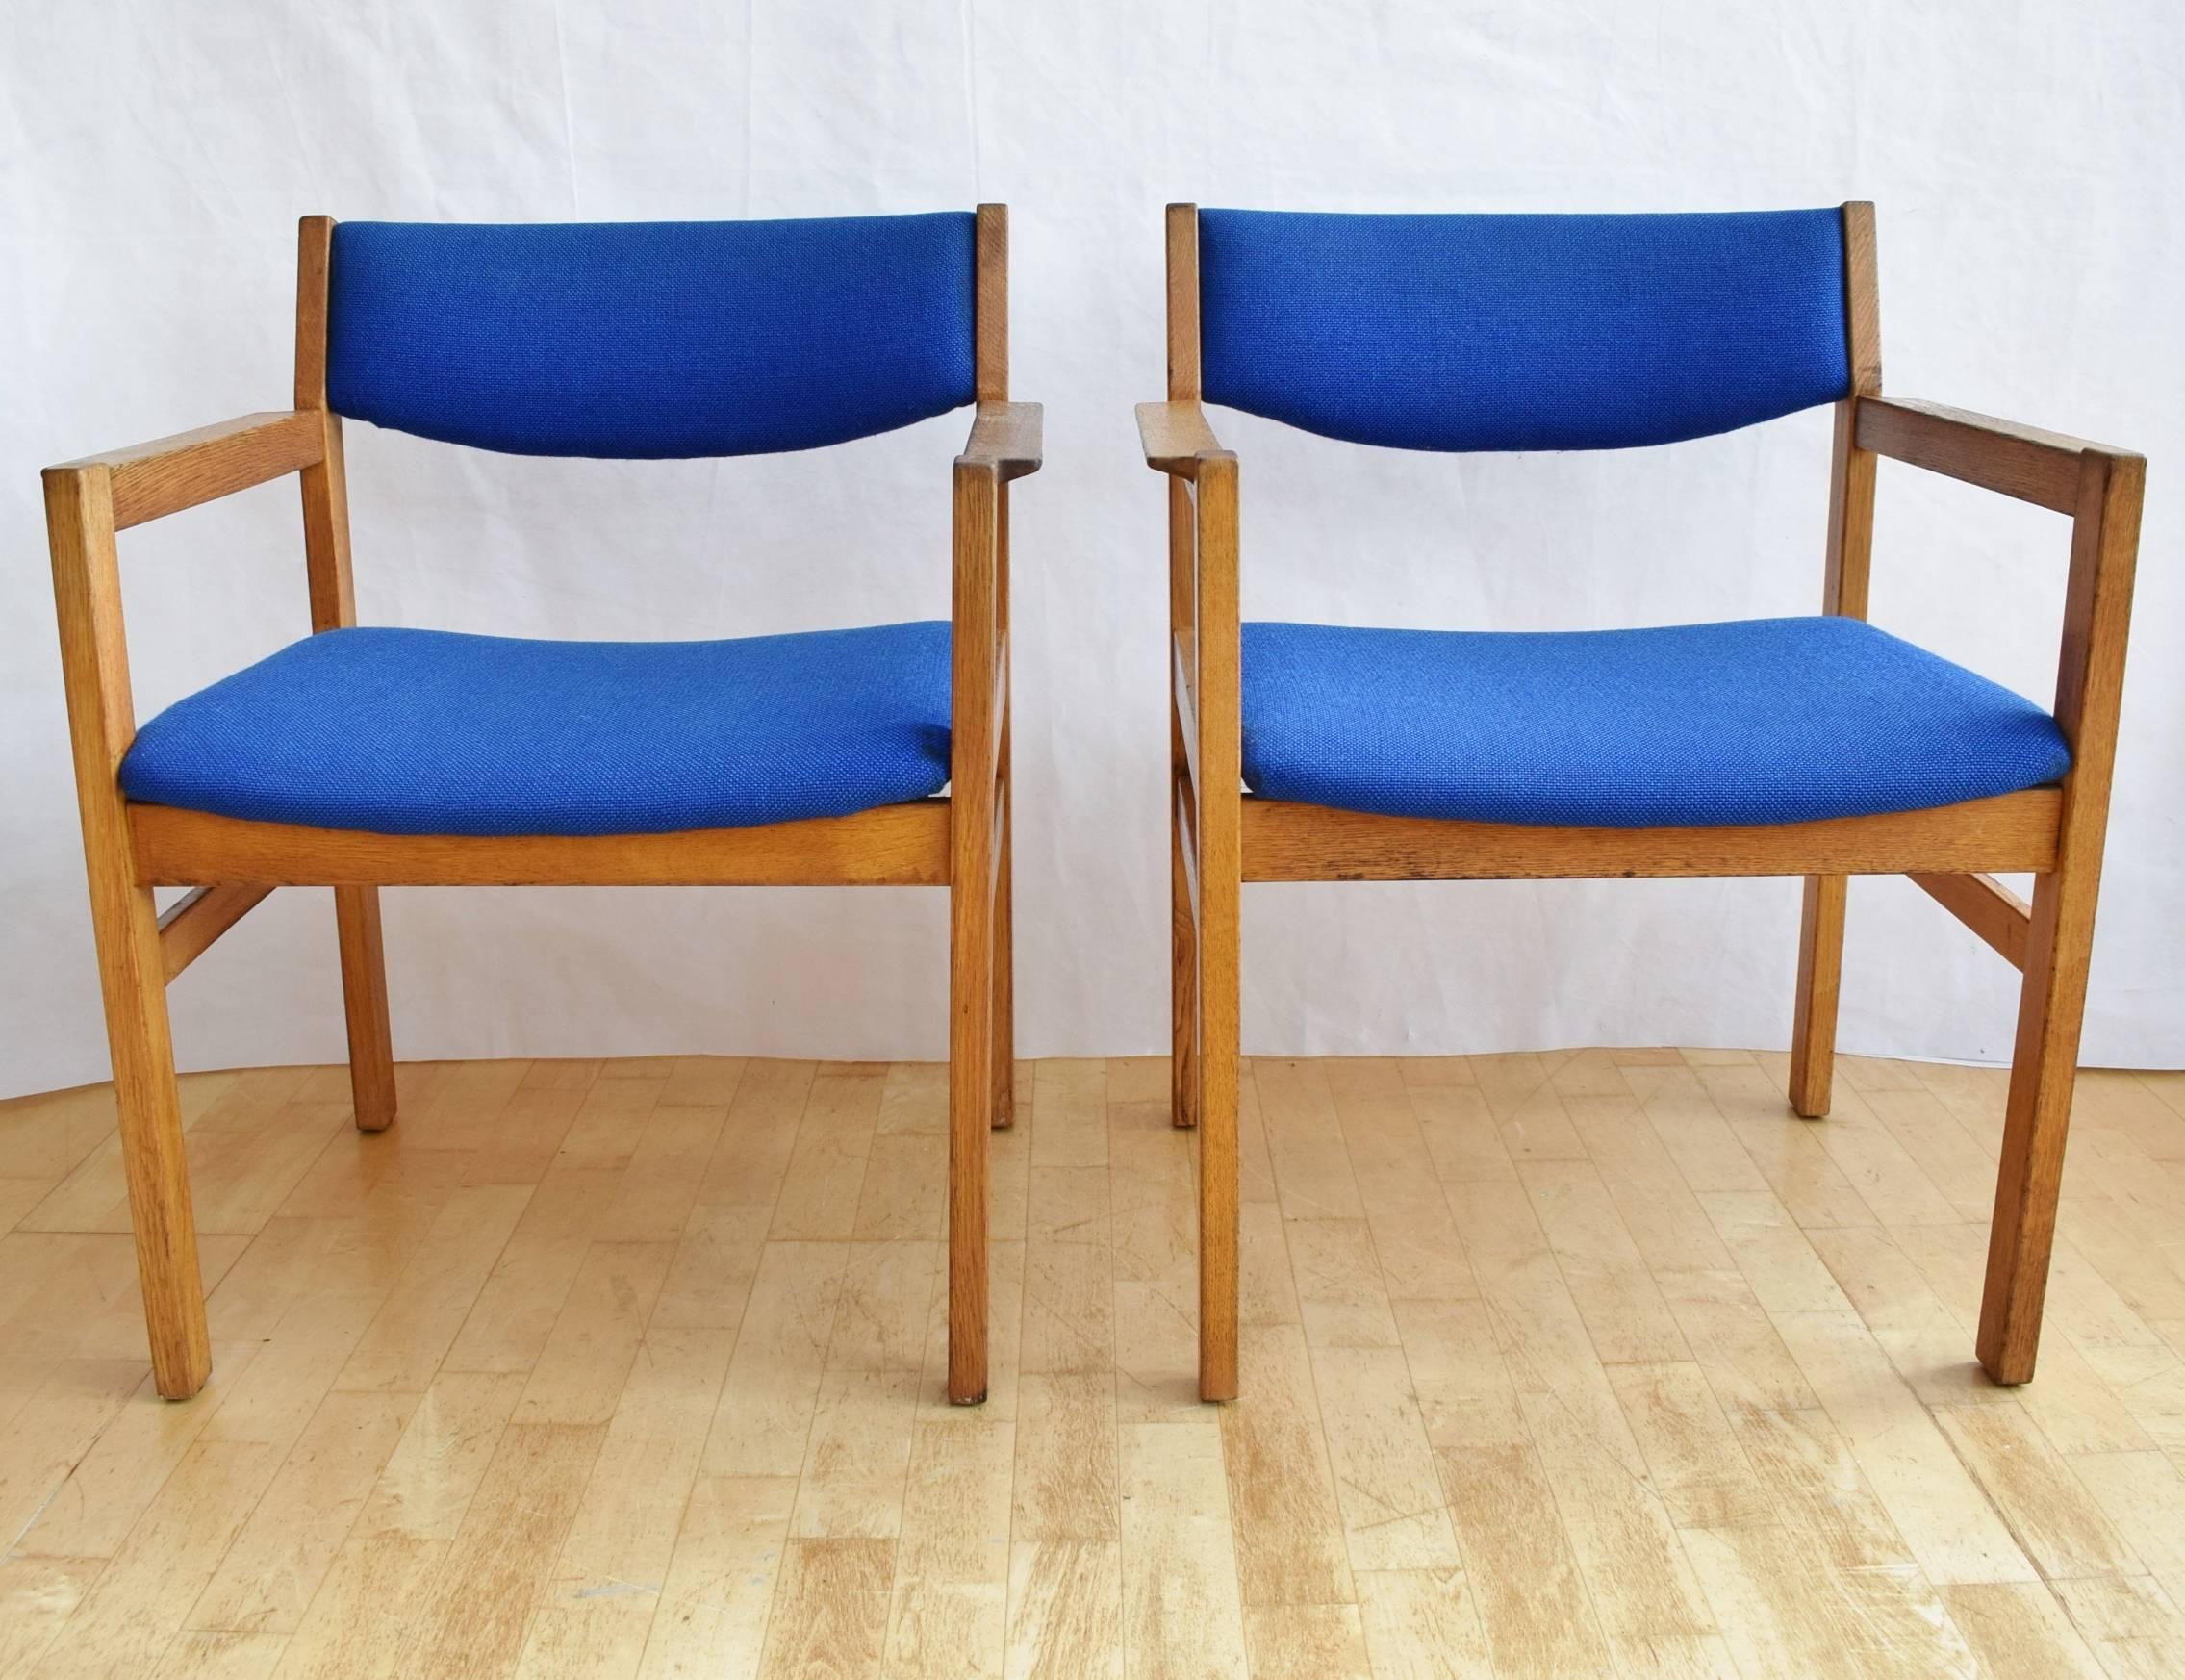 20th Century Mid-Century Retro Danish Pair of Armchairs, Børge Mogensen for FDB Mobler, 1970s For Sale